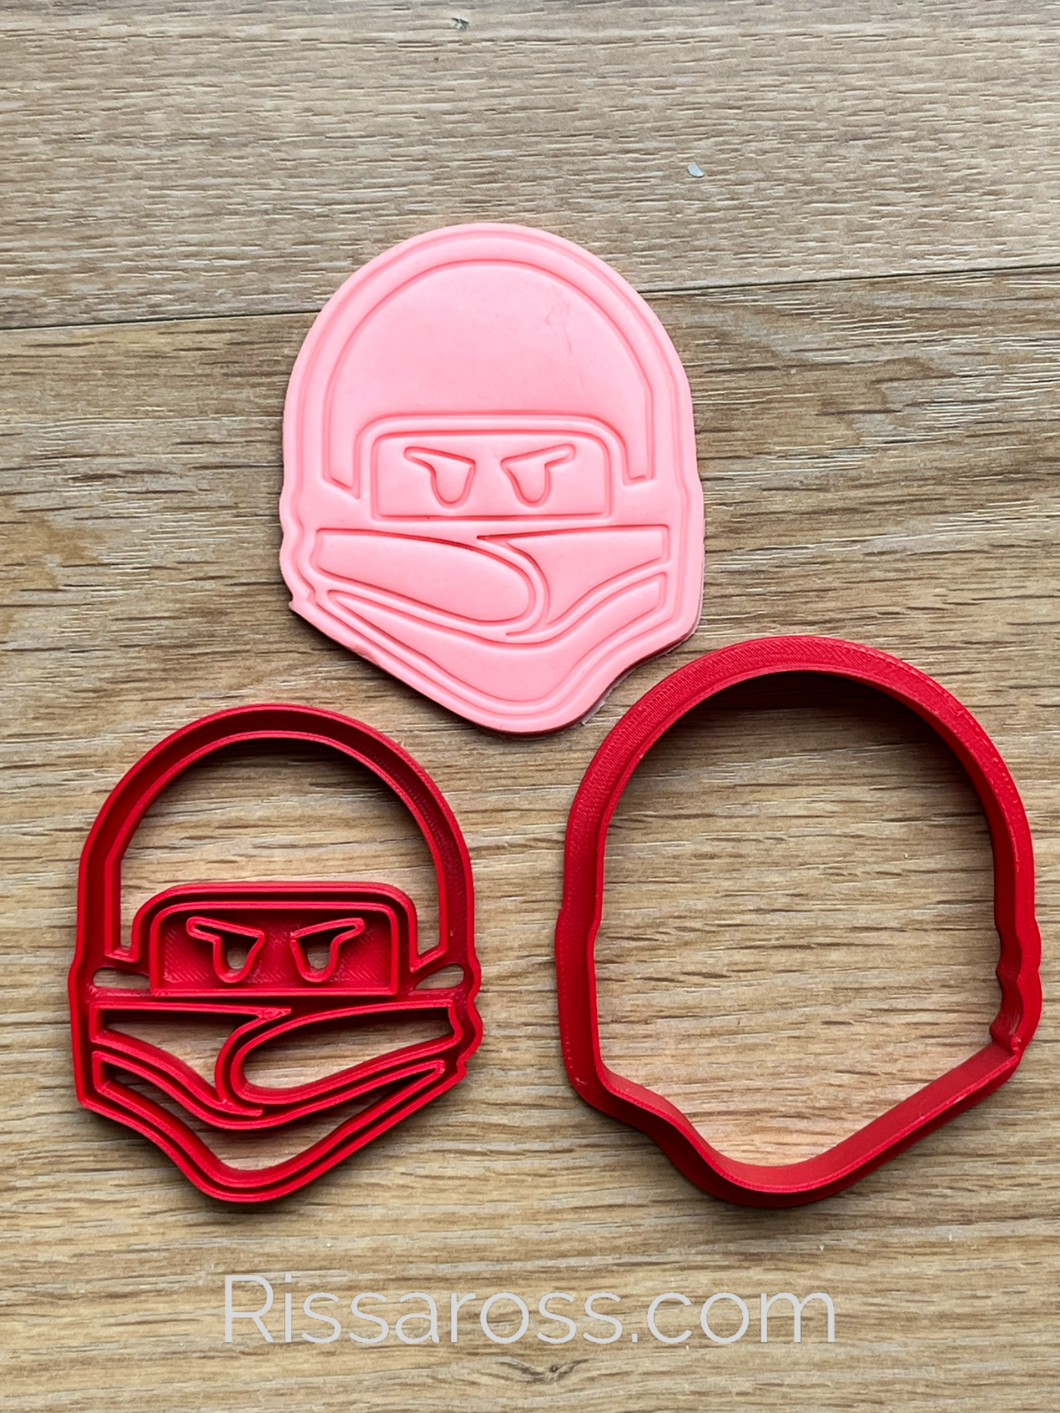 Ninjago Cookie Cutter Stamp Mask